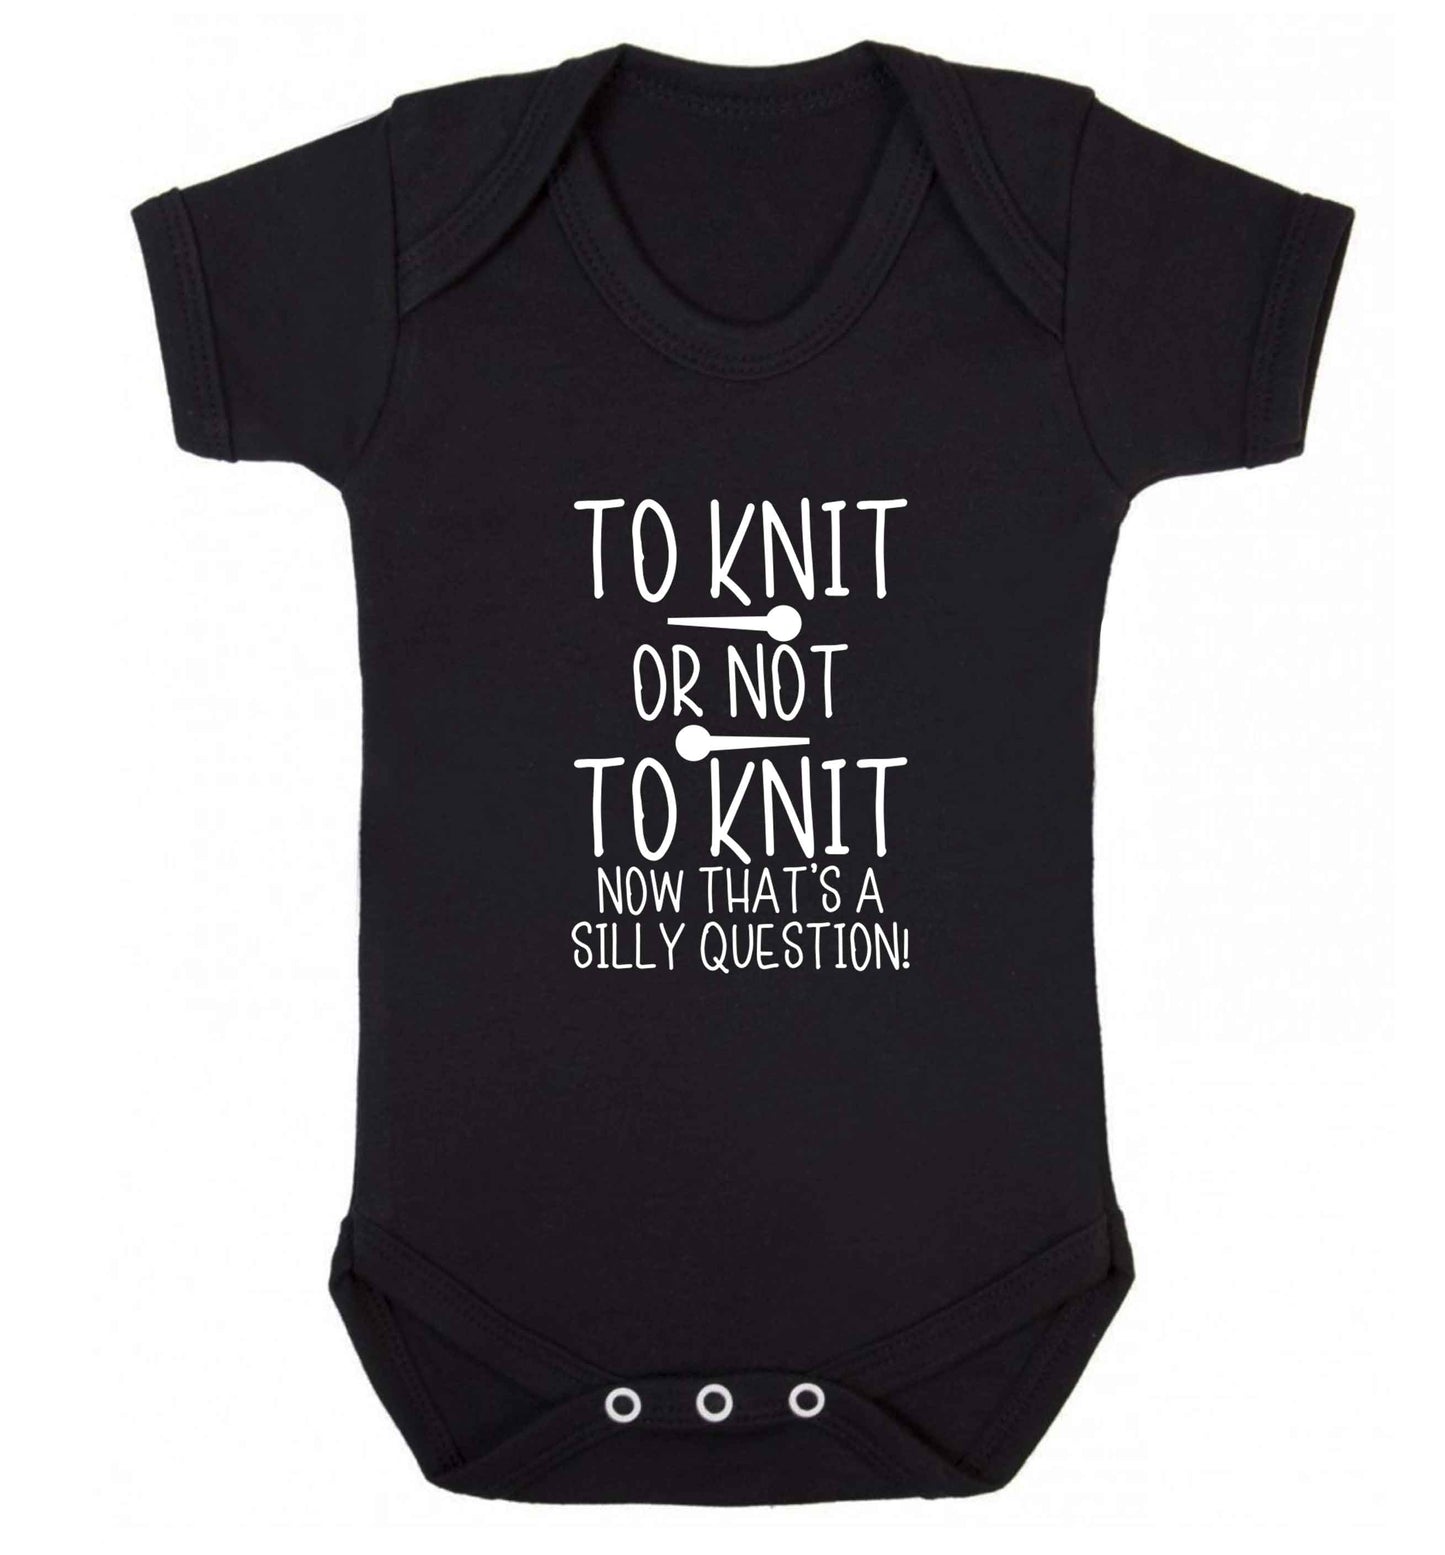 To knit or not to knit now that's a silly question baby vest black 18-24 months